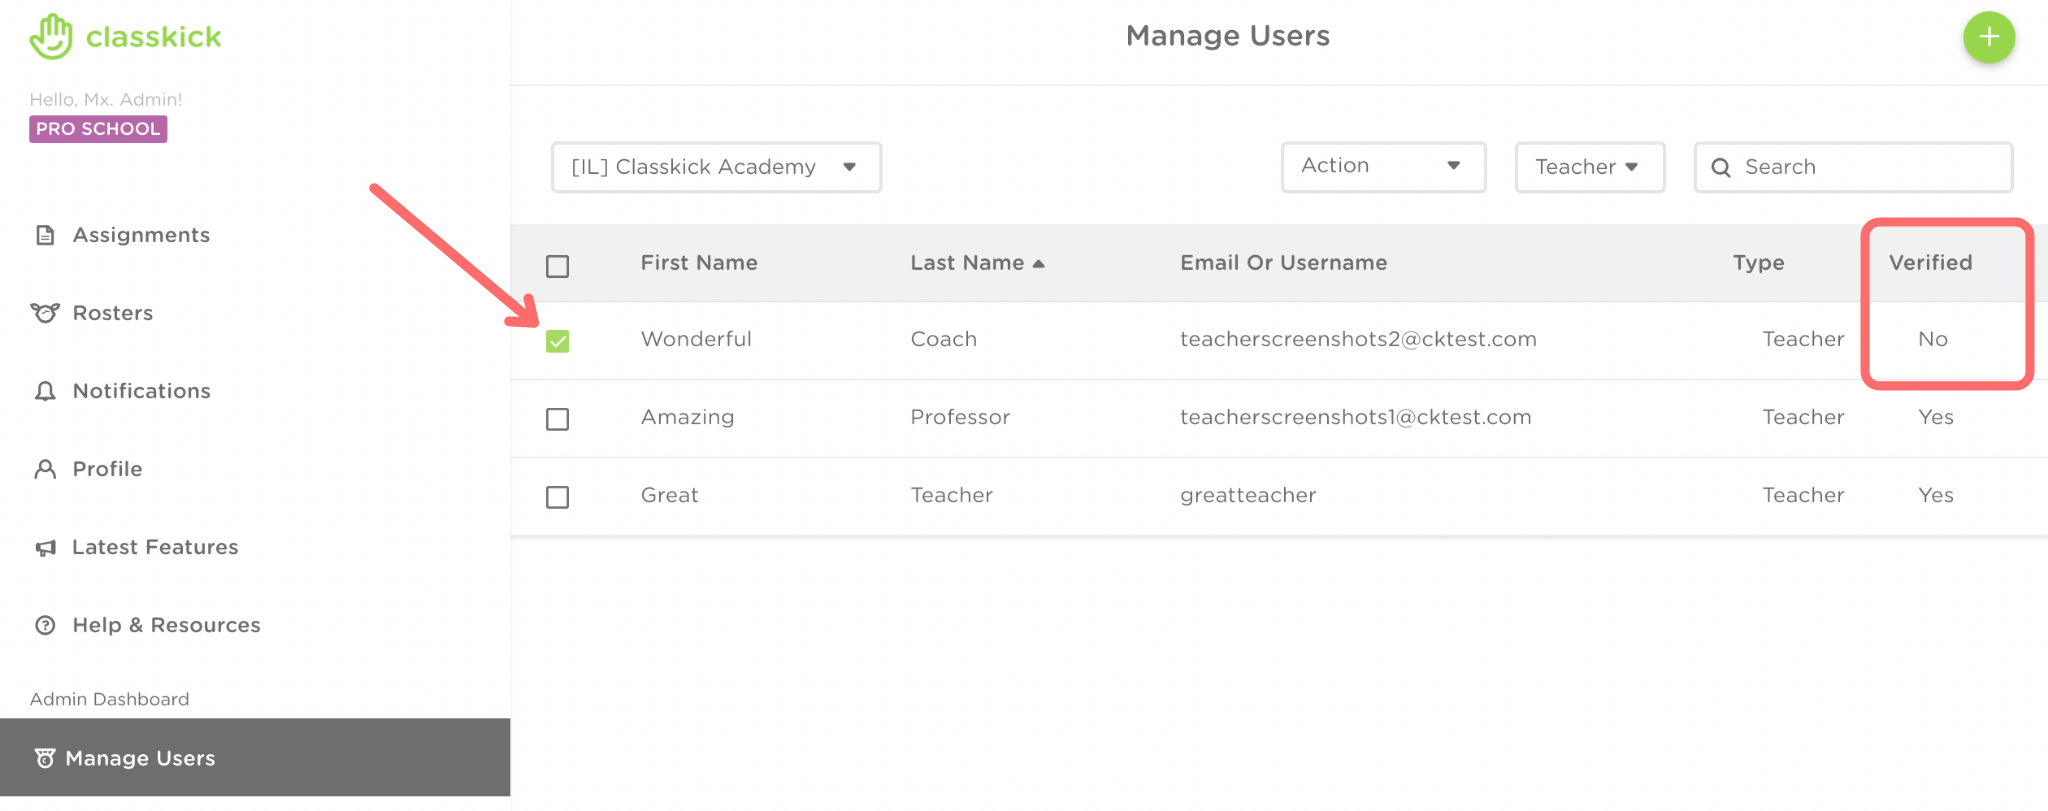 Manage users dashboard is shown. An arrow points to an unverified teacher.